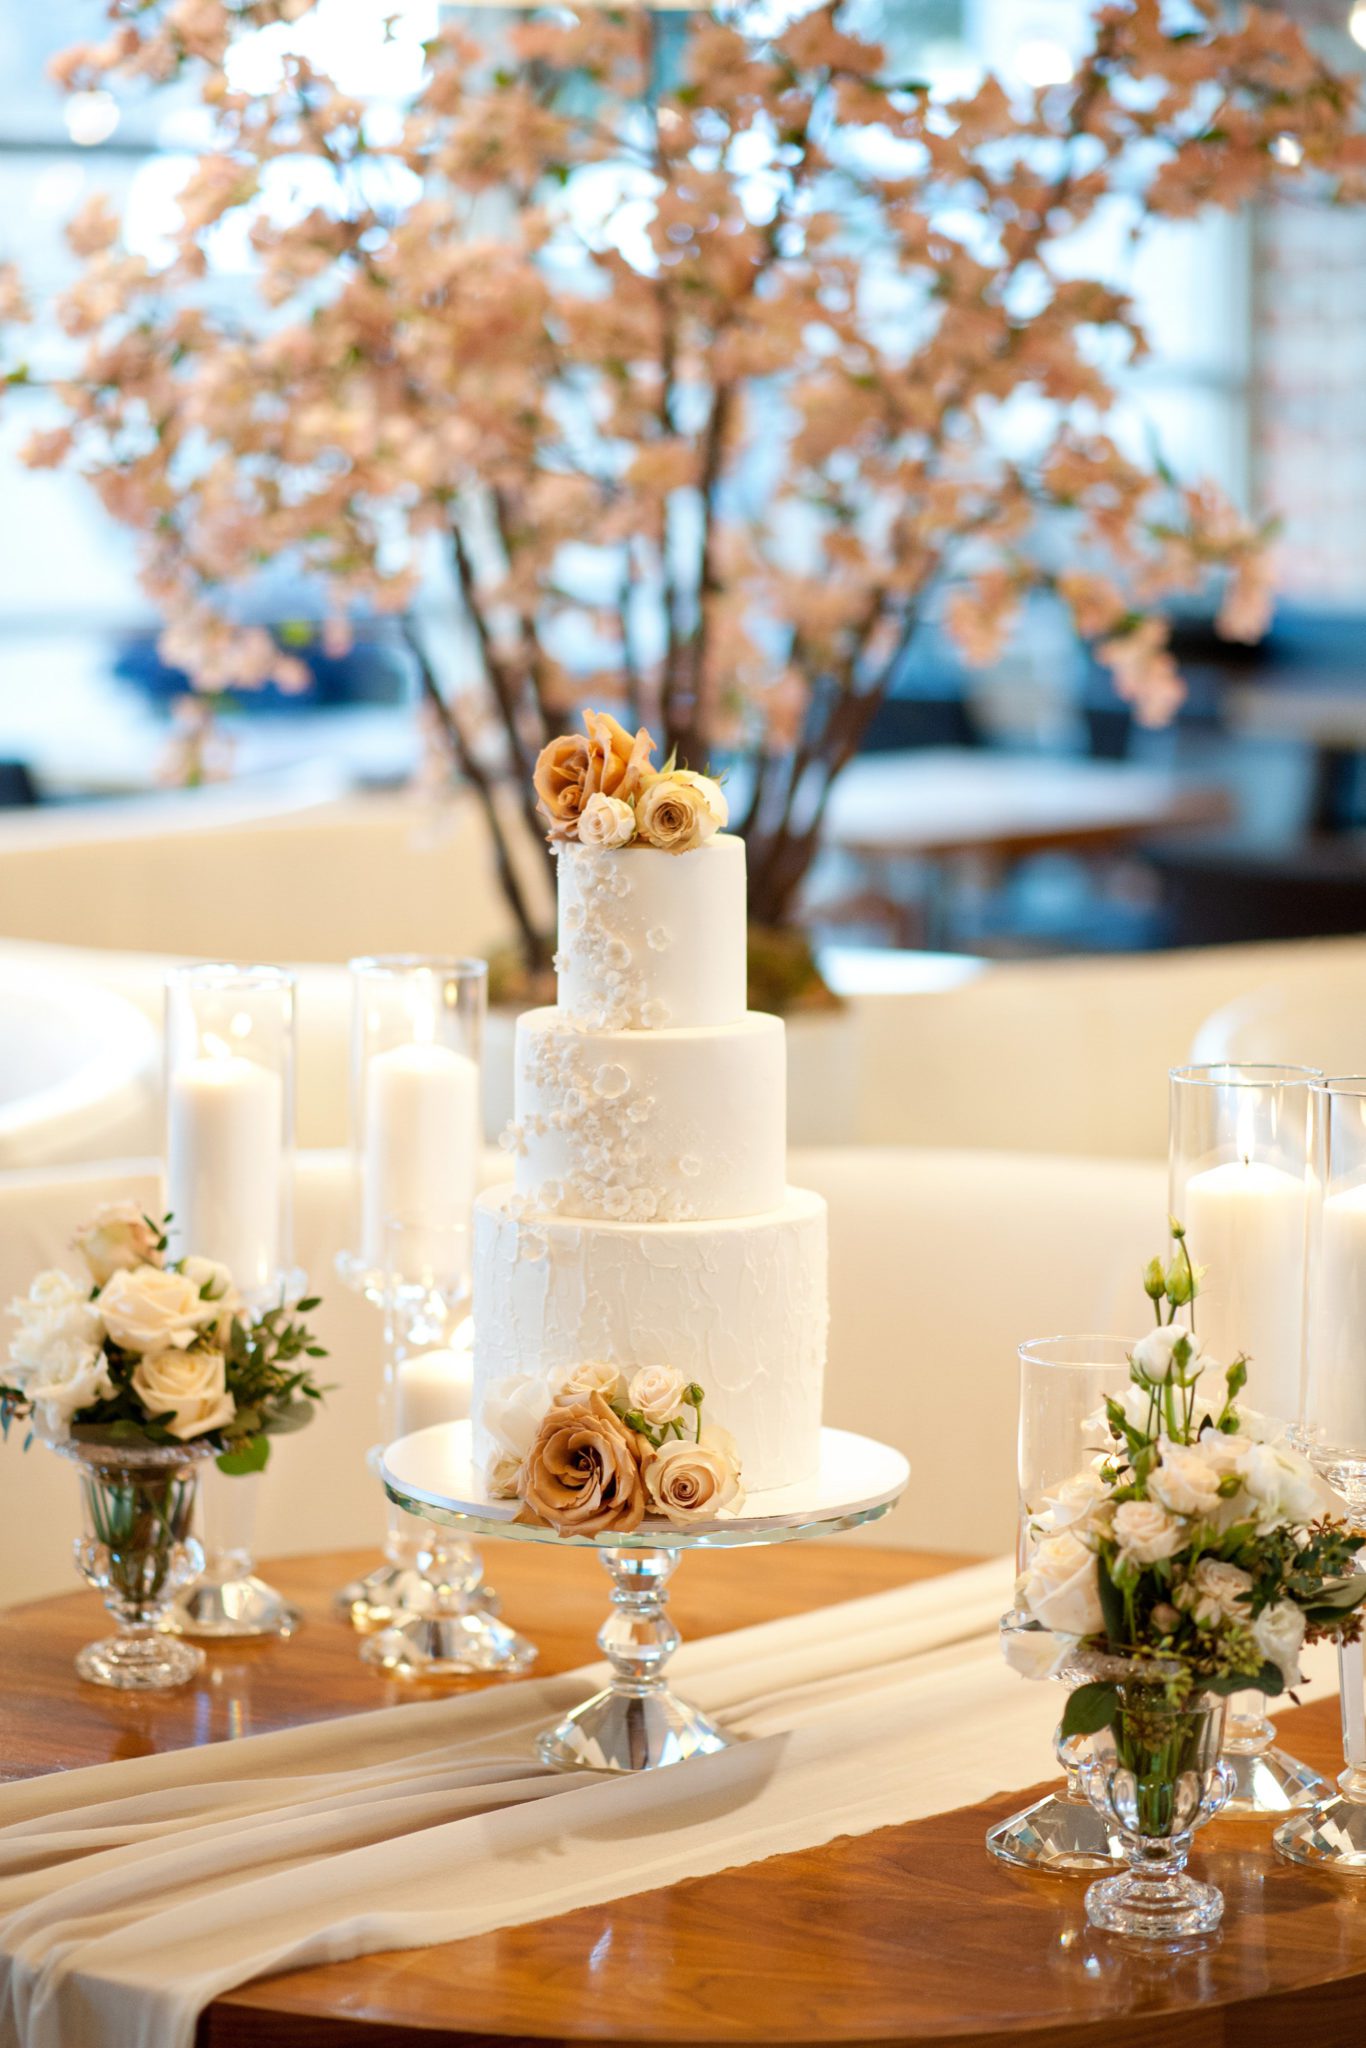 Show-stopping wedding cake for the classic and elegant couple